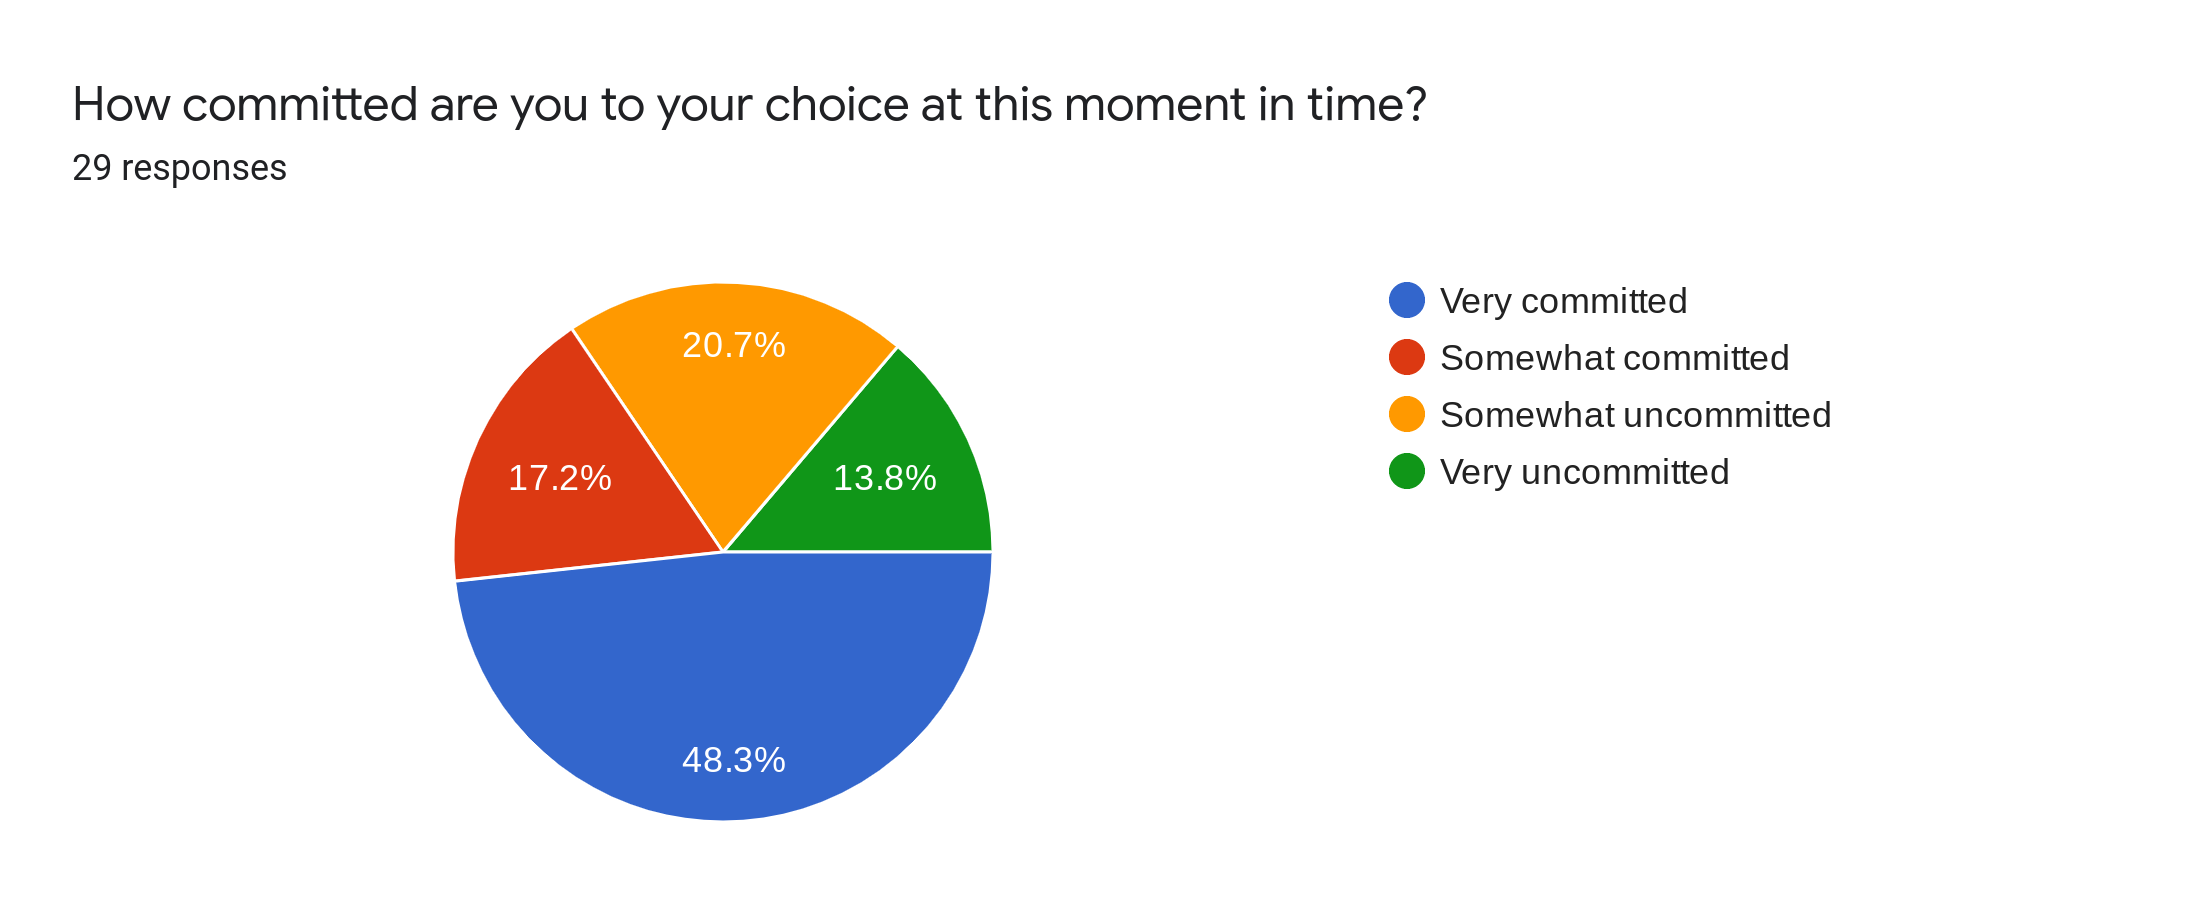 Forms response chart. Question title: How committed are you to your choice at this moment in time?. Number of responses: 29 responses.